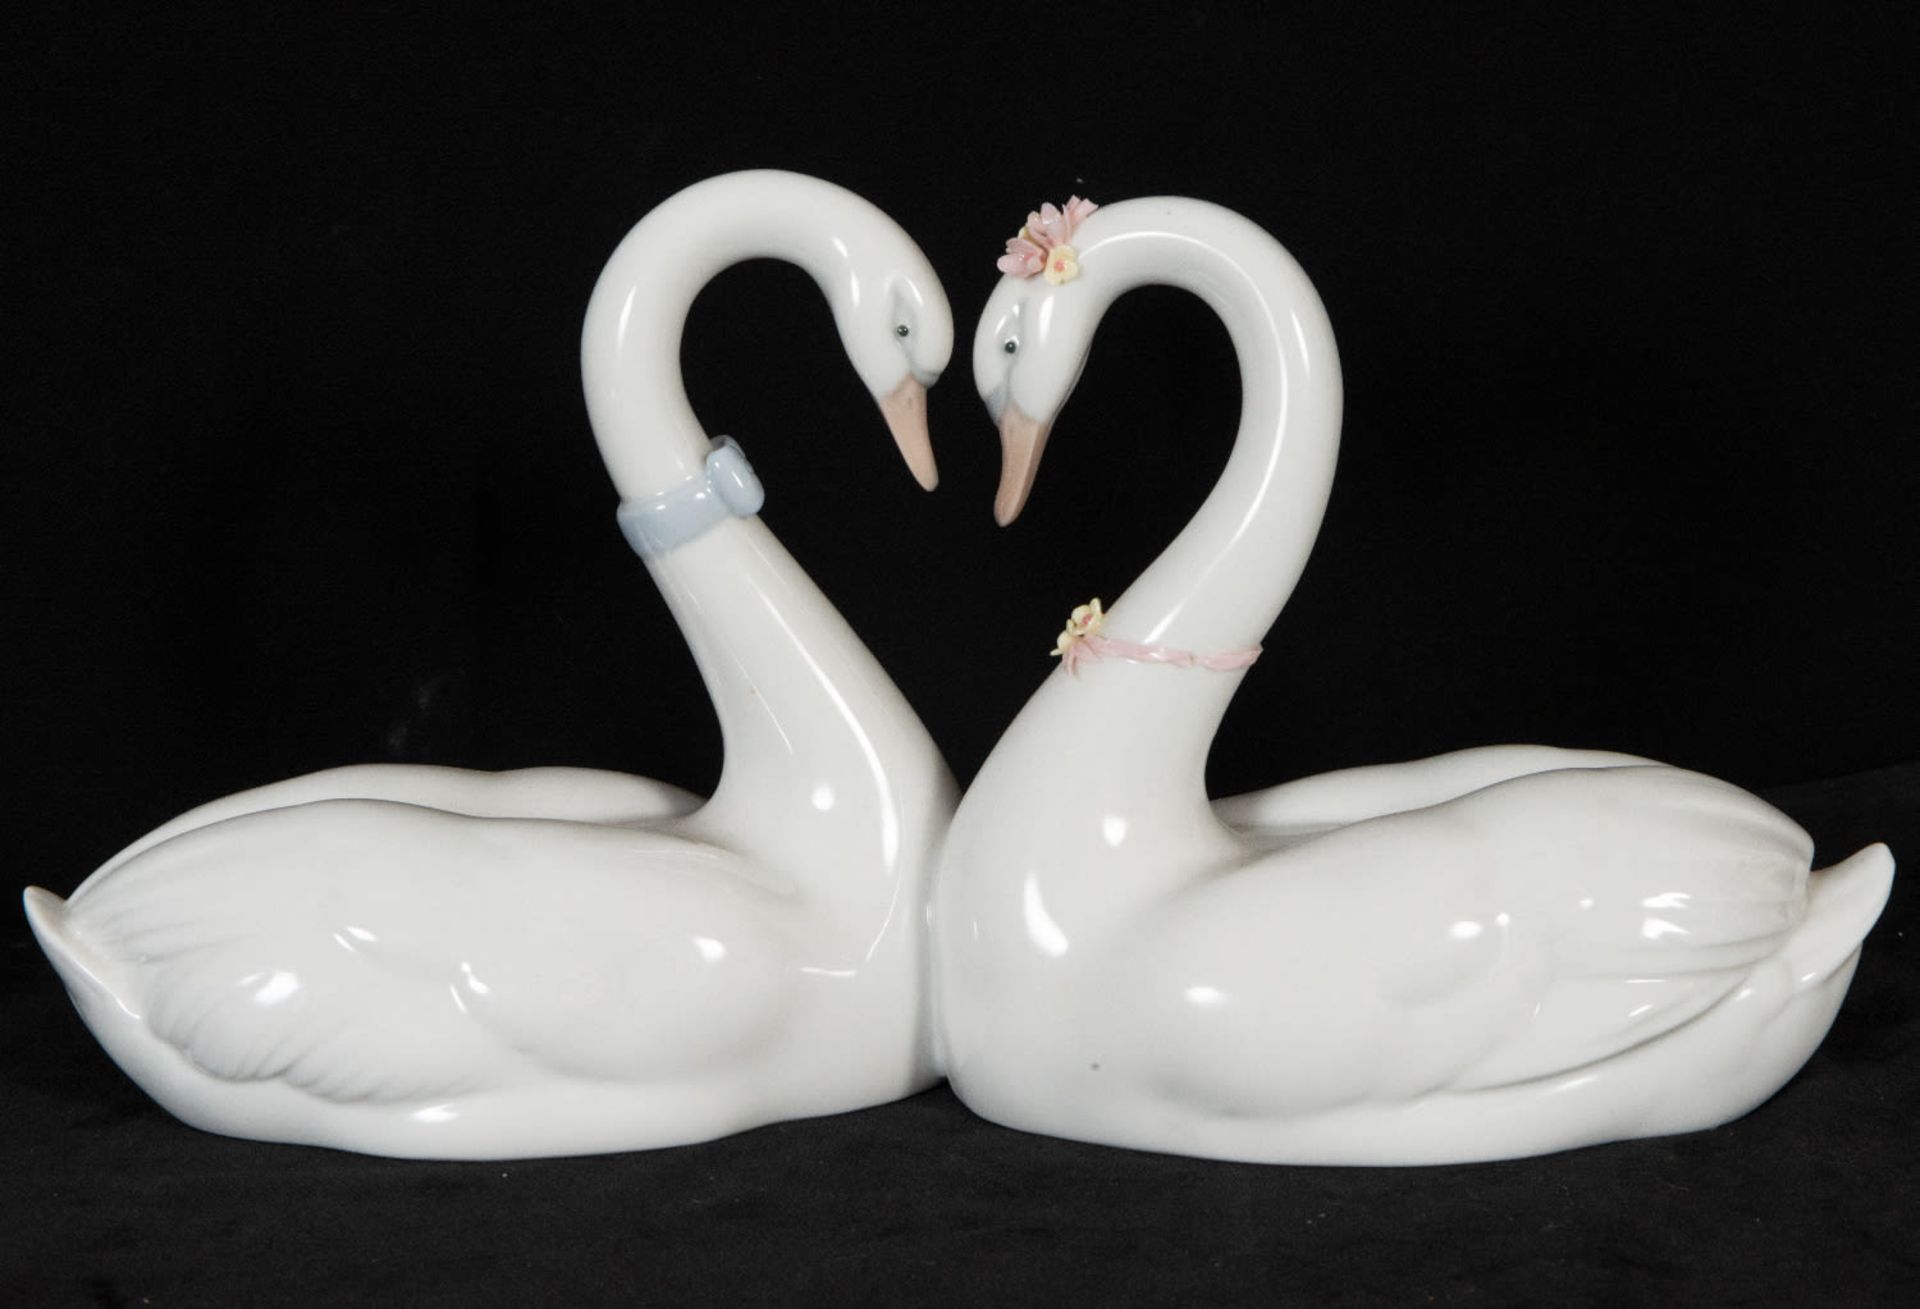 Pair of Sèvres porcelain dressing table jewelry boxes and porcelain swan, 19th century - Image 10 of 10